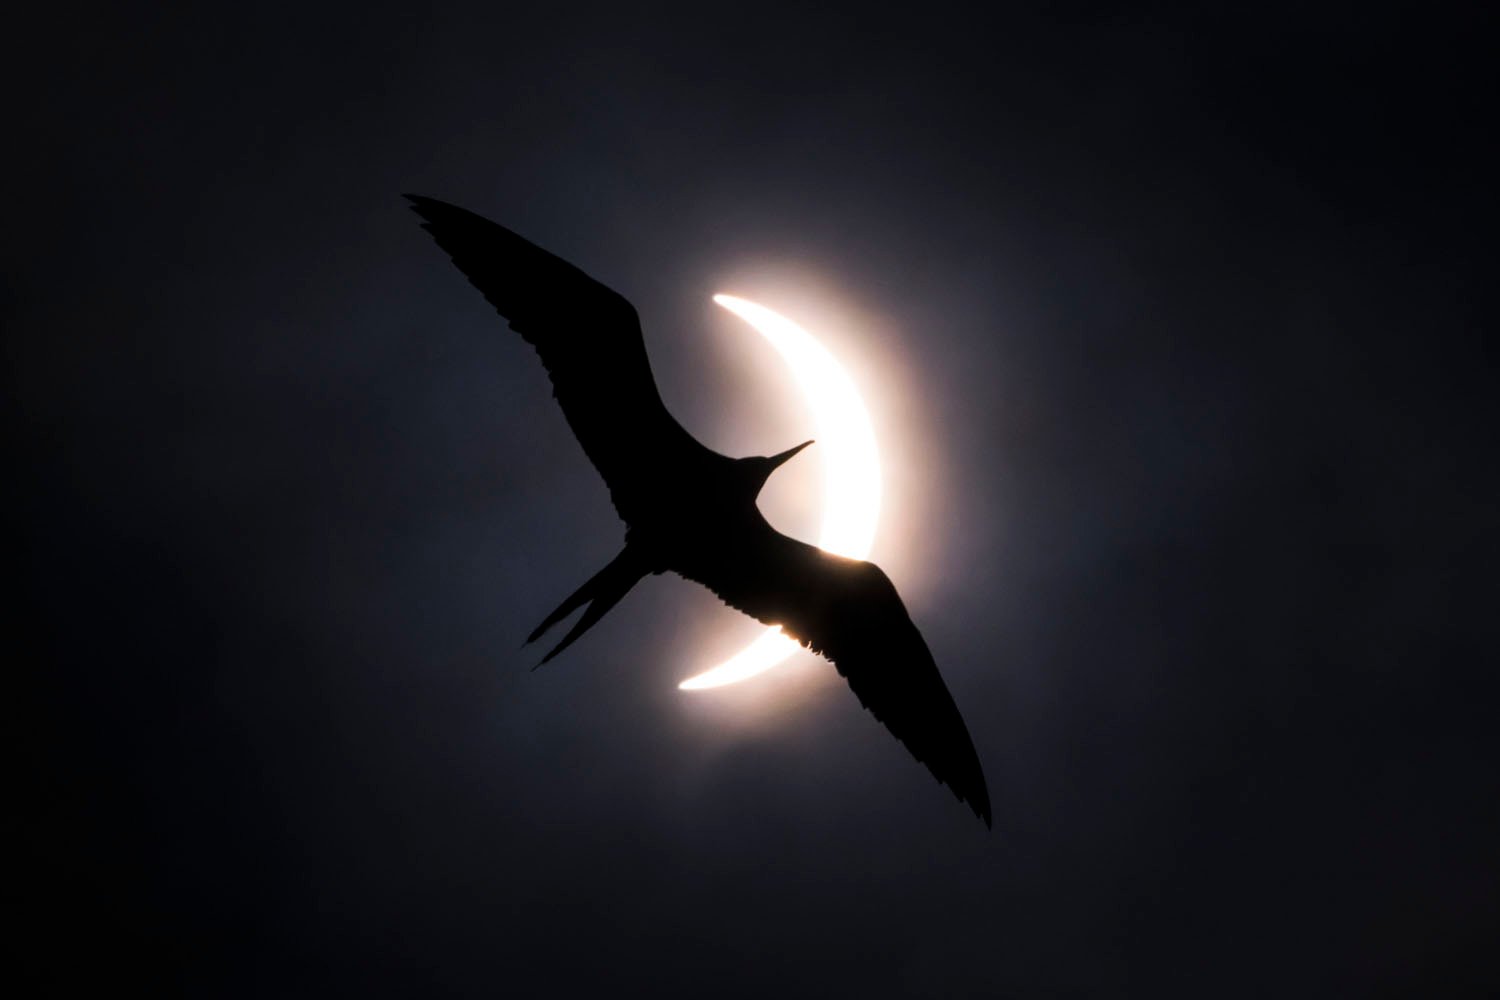 The silhouette of a bird flying in front of a half-eclipsed Sun creates a striking contrast between the bird's dark form and the bright halo.